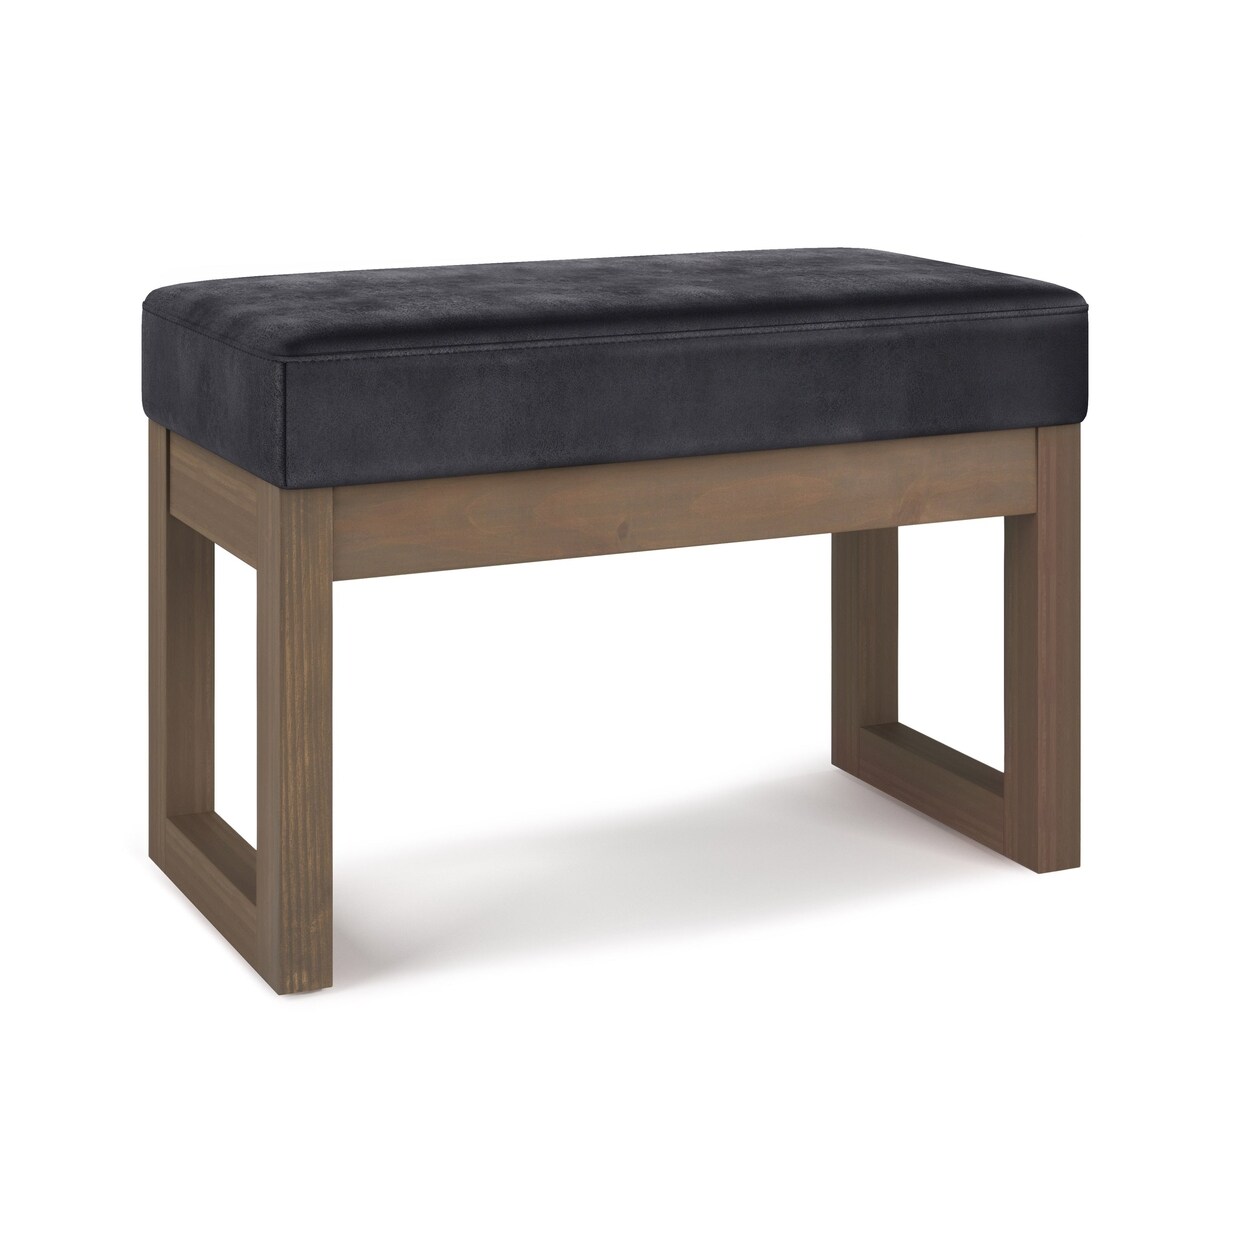 Simpli Home Milltown Small Ottoman Bench in Distressed Vegan Leather